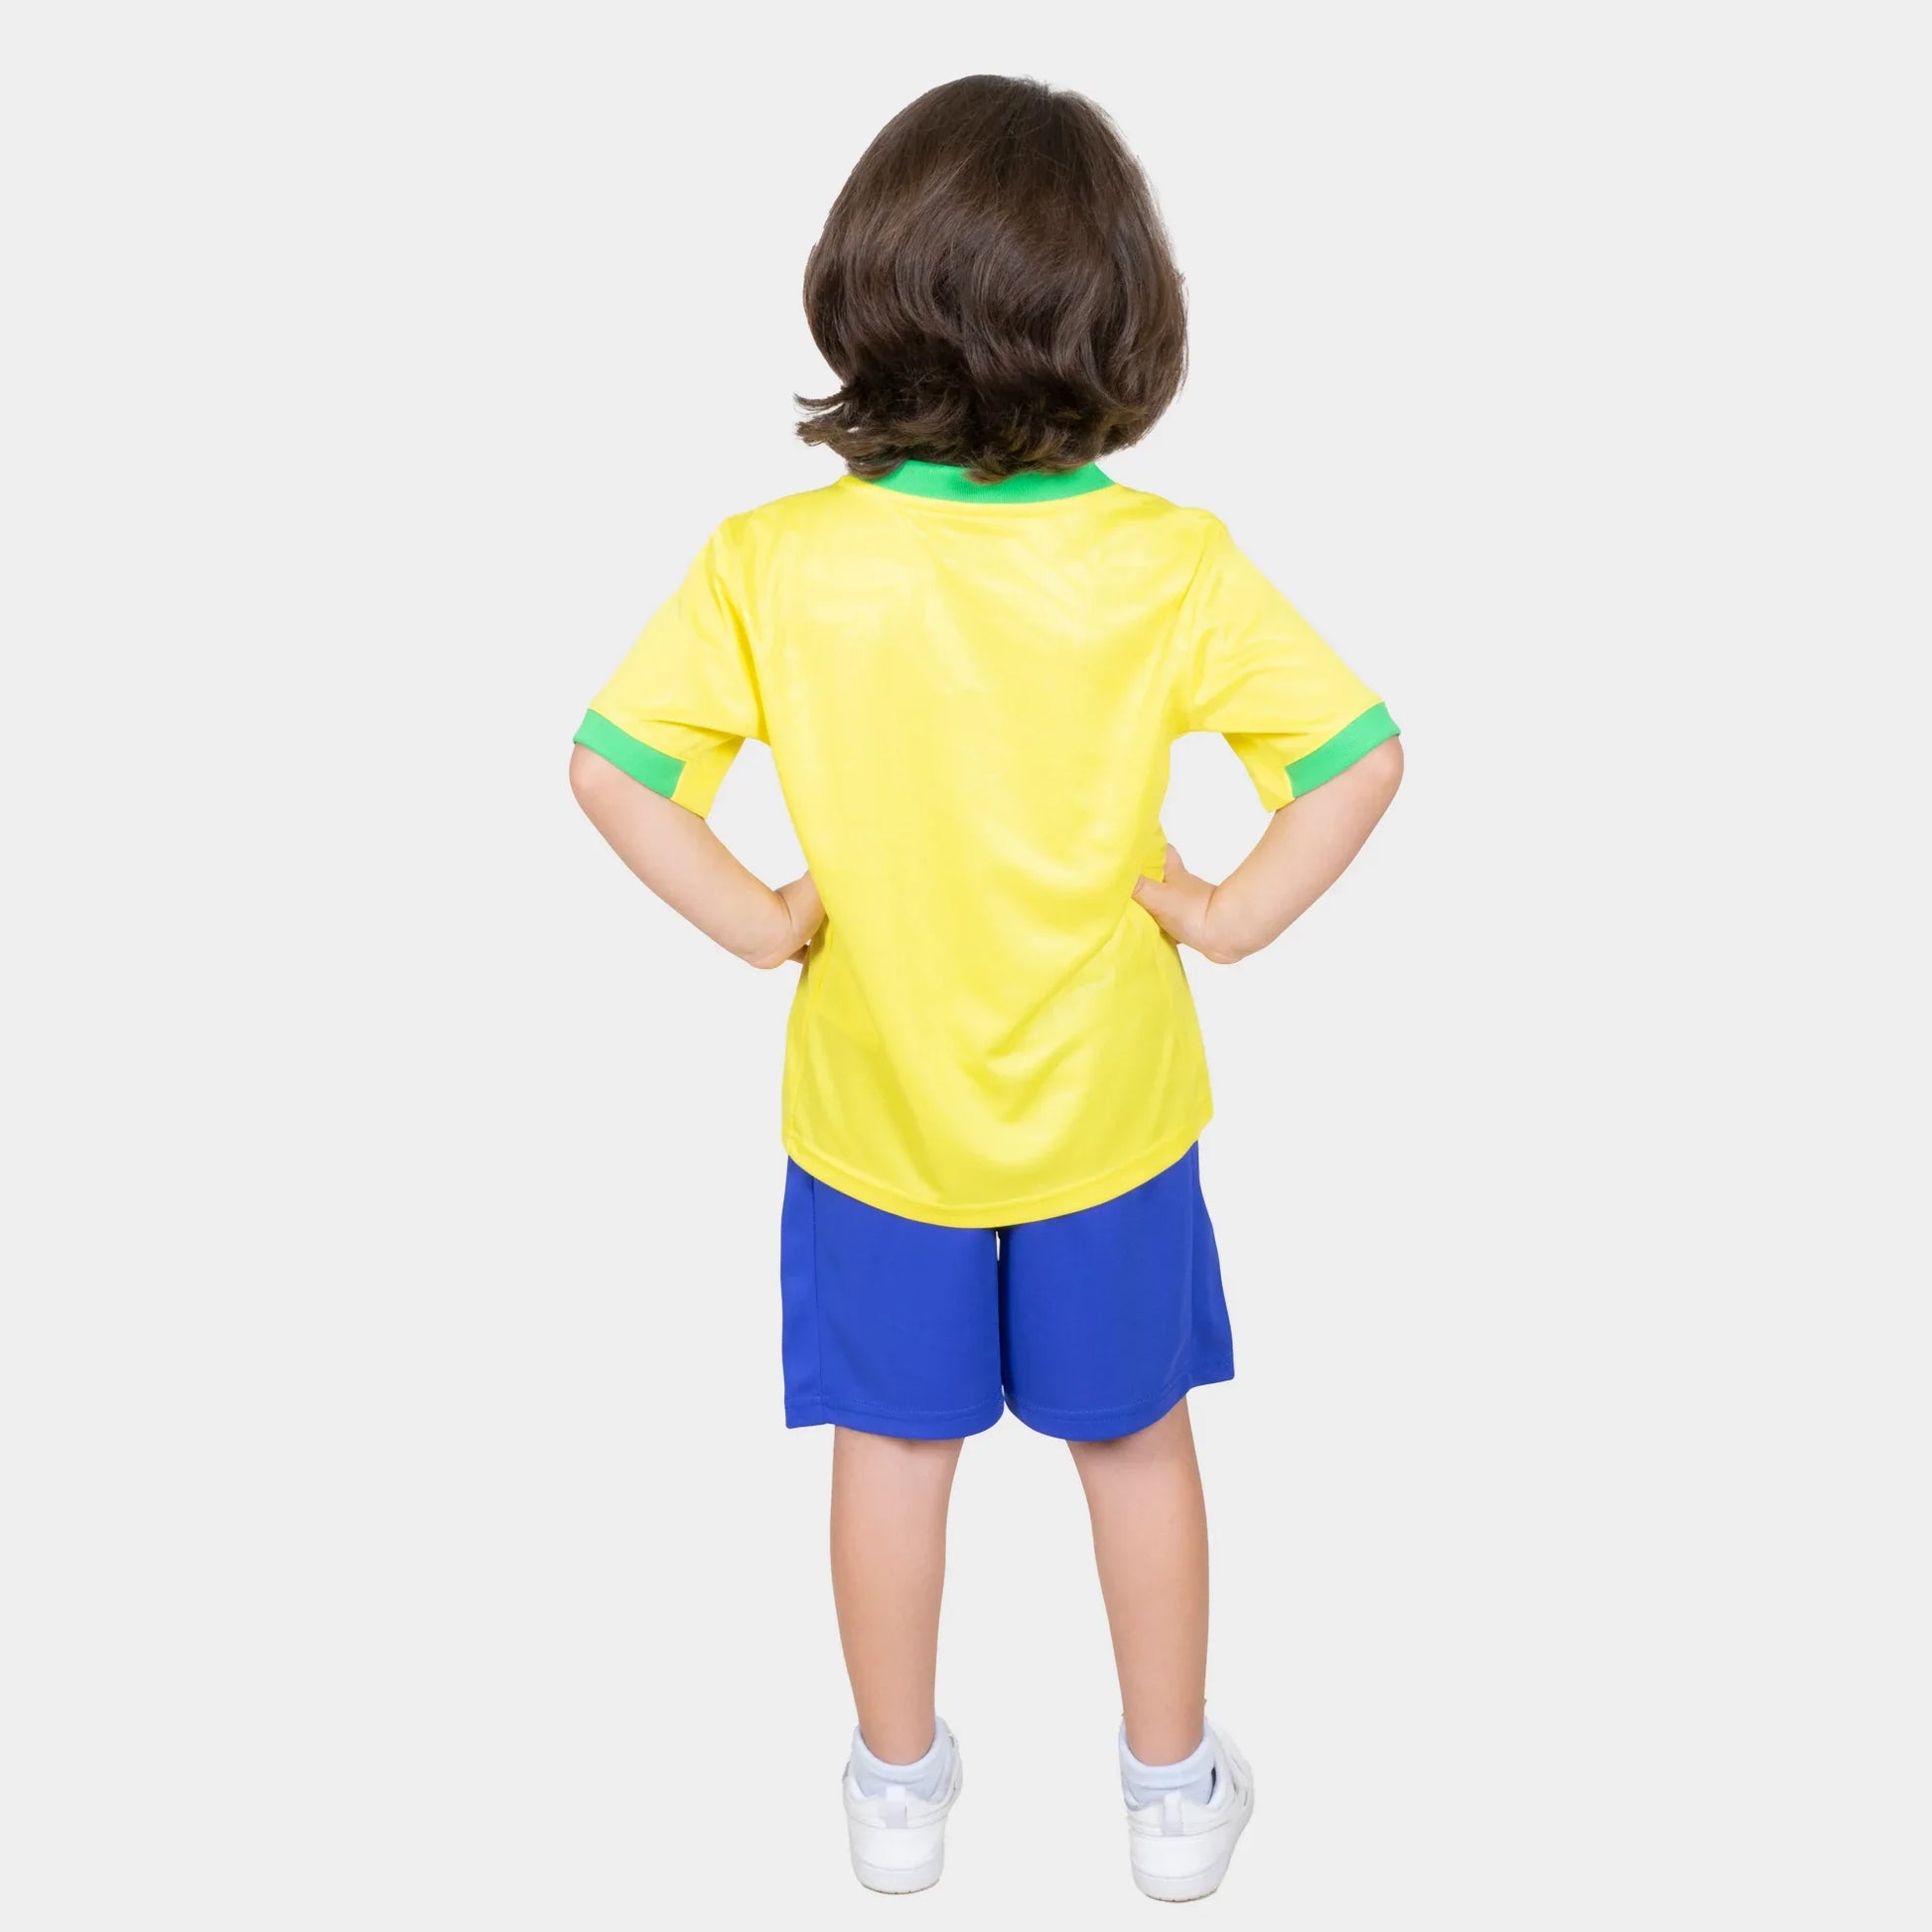 Brazil Kids Kit Home Season 23/24 Designed By Mitani Store , Regular Fit Jersey Short Sleeves And V-Neck Collar In Yellow Color